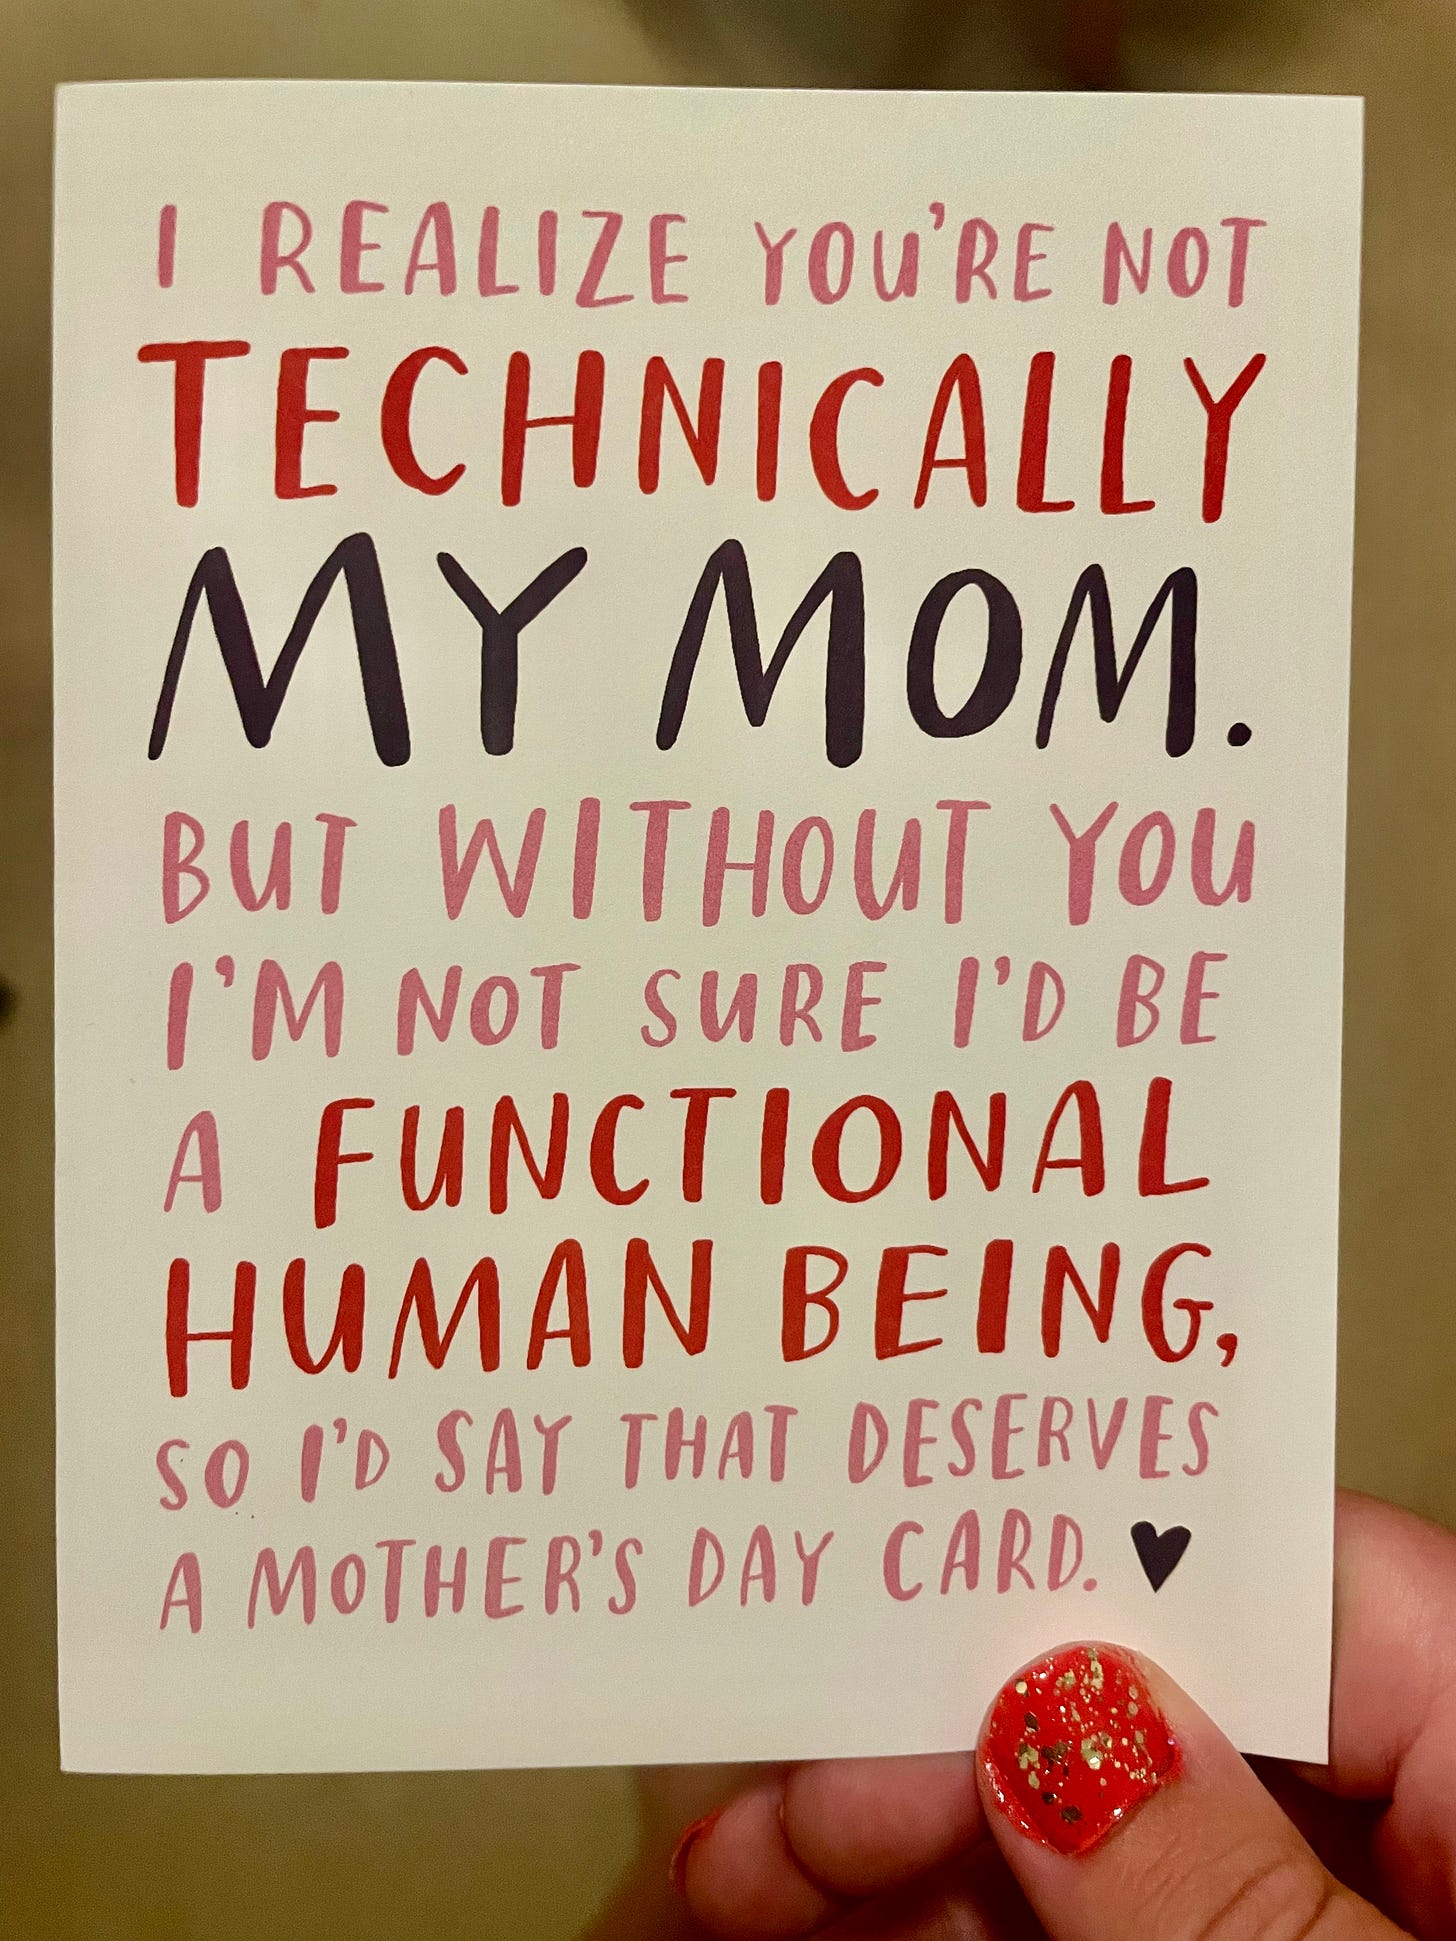 me holding a mothers day card that reads: "I realize that you aren't technically my mom. But without you I'm not sure I'd be a functional human being, so I'd say that deserves a Mother's Day card."